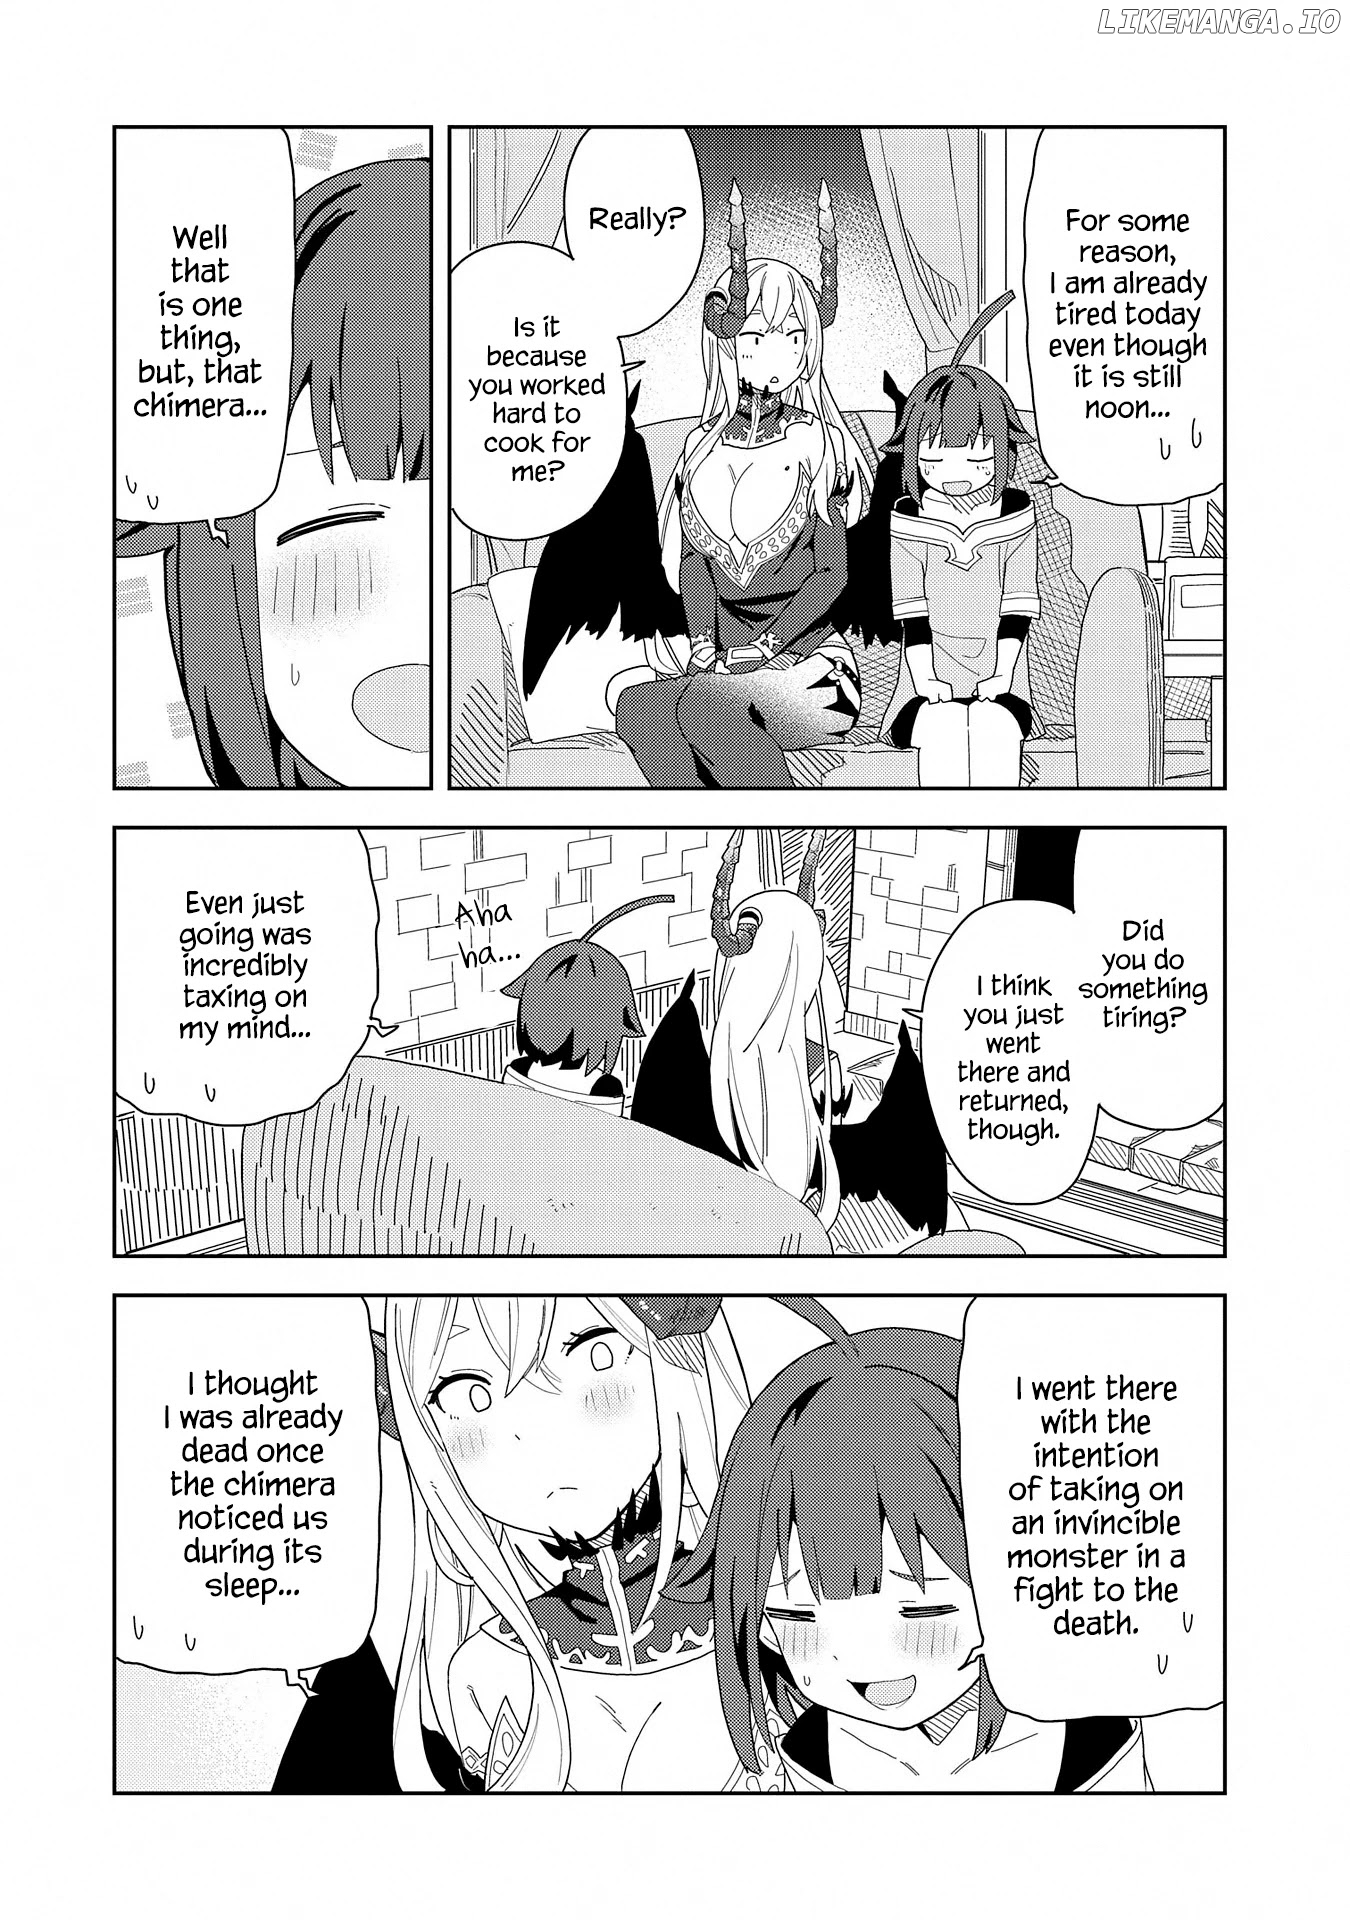 I Summoned The Devil To Grant Me a Wish, But I Married Her Instead Since She Was Adorable ~My New Devil Wife~ chapter 5 - page 20